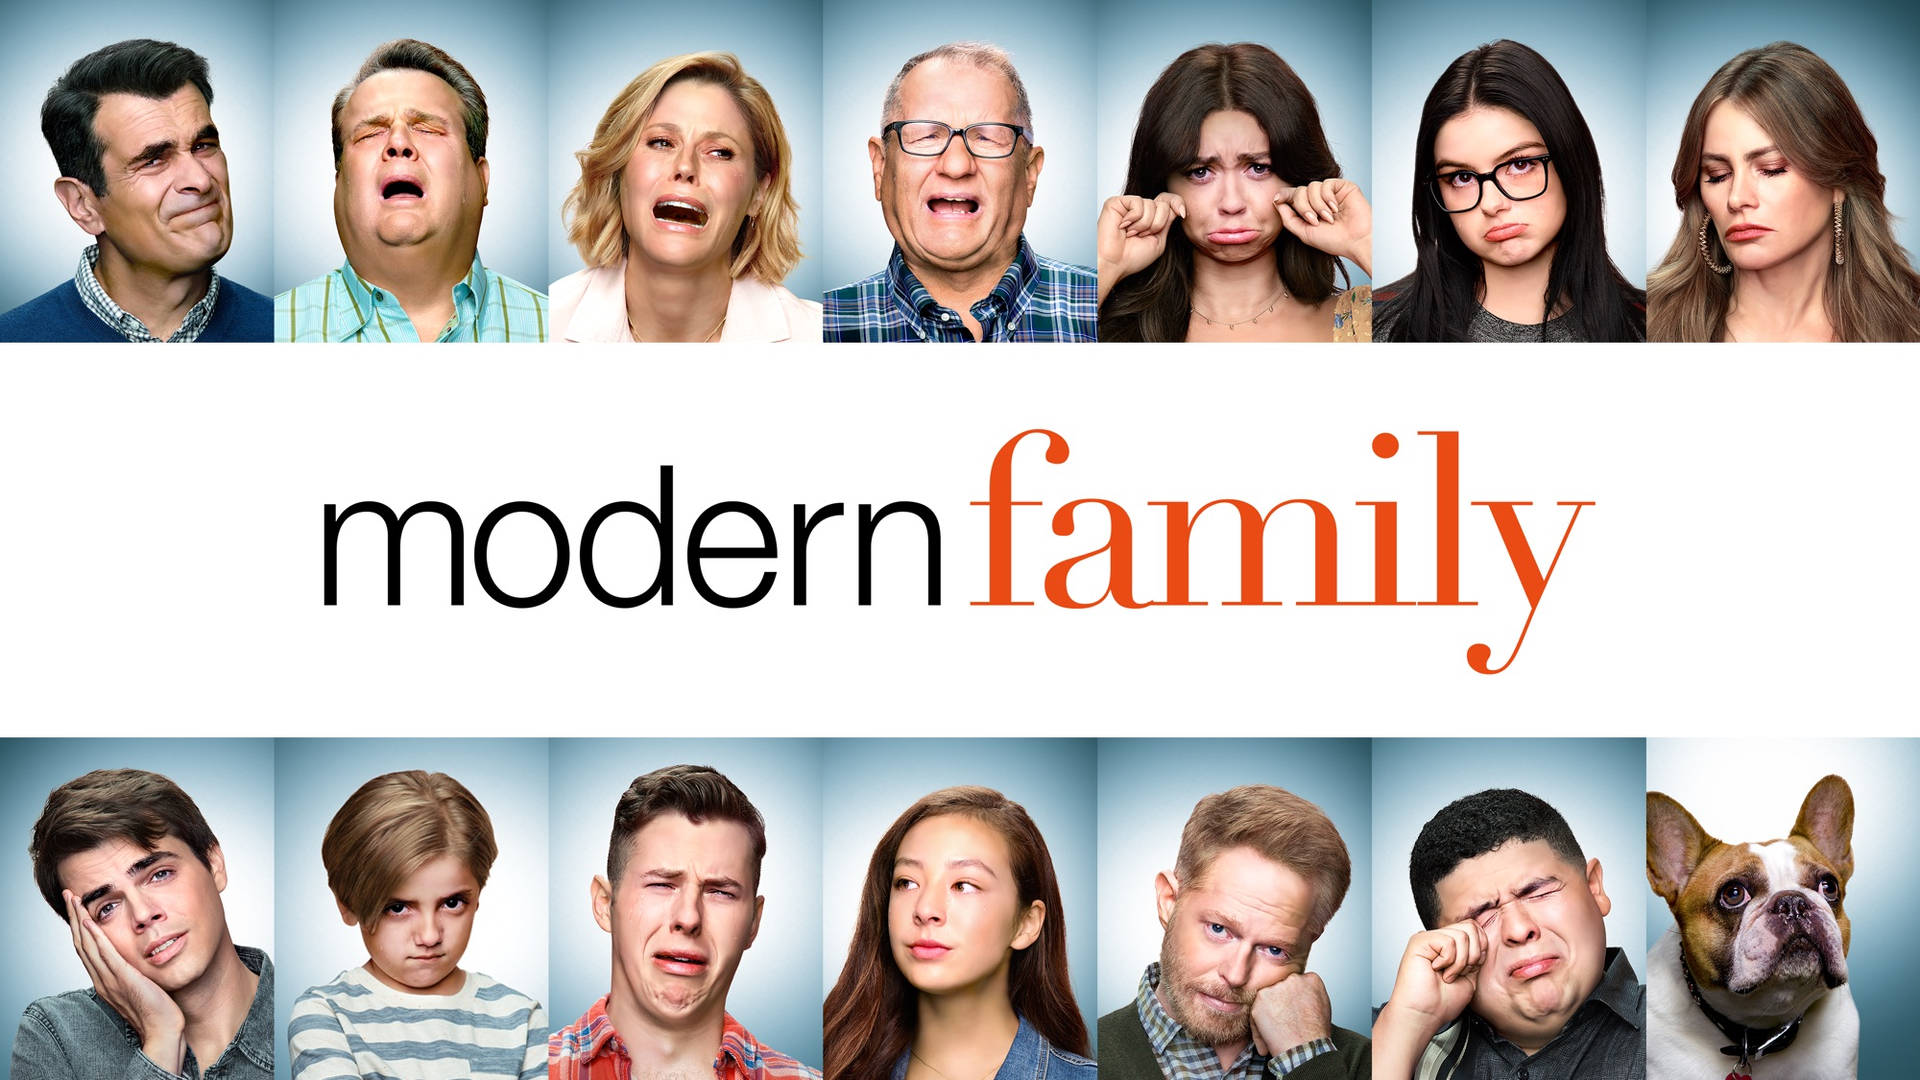 The Modern Family Cast On The Dvd Cover Of Their Hit Sitcom Background